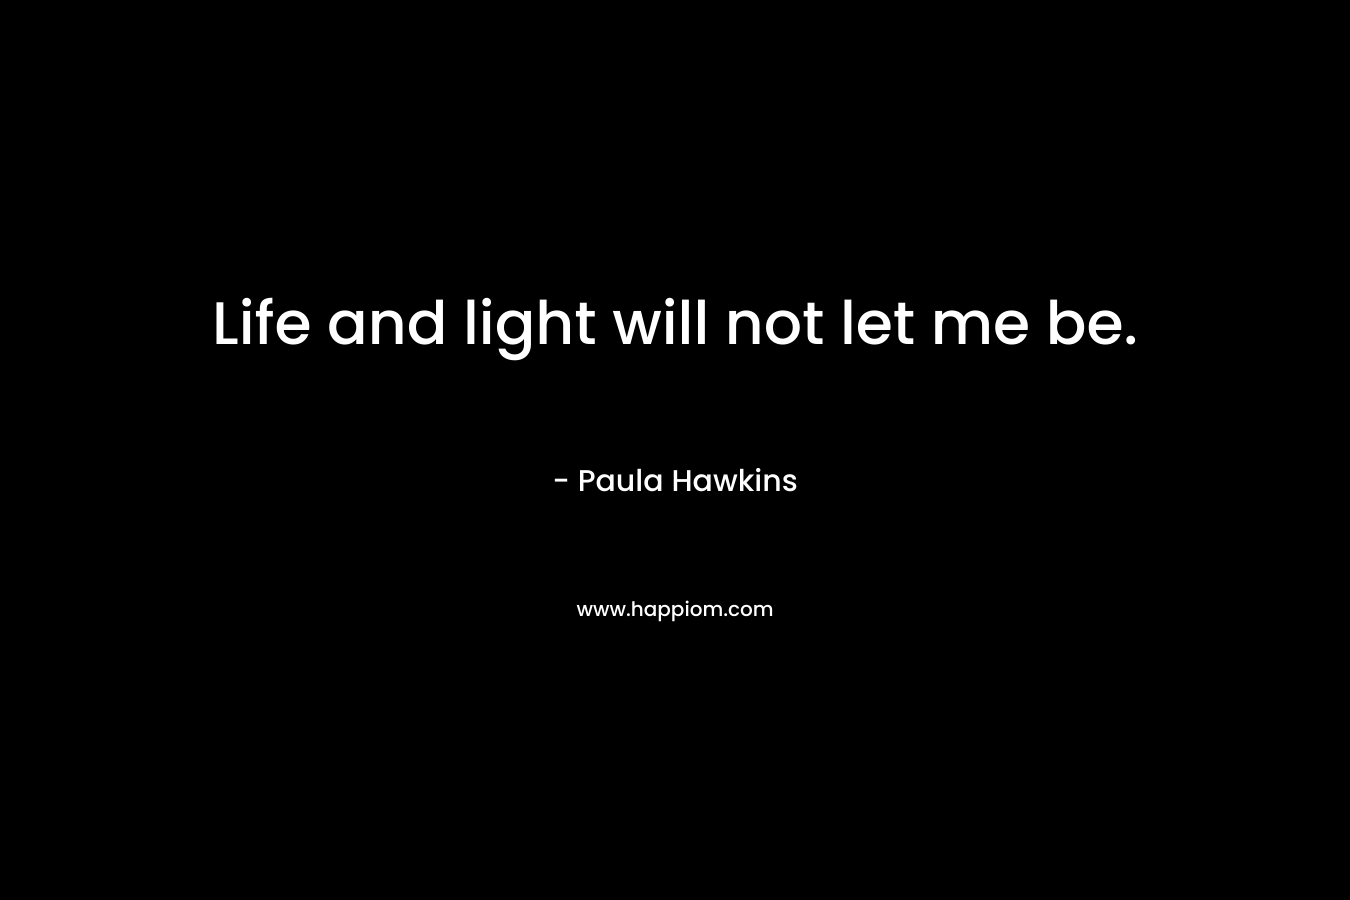 Life and light will not let me be. – Paula Hawkins